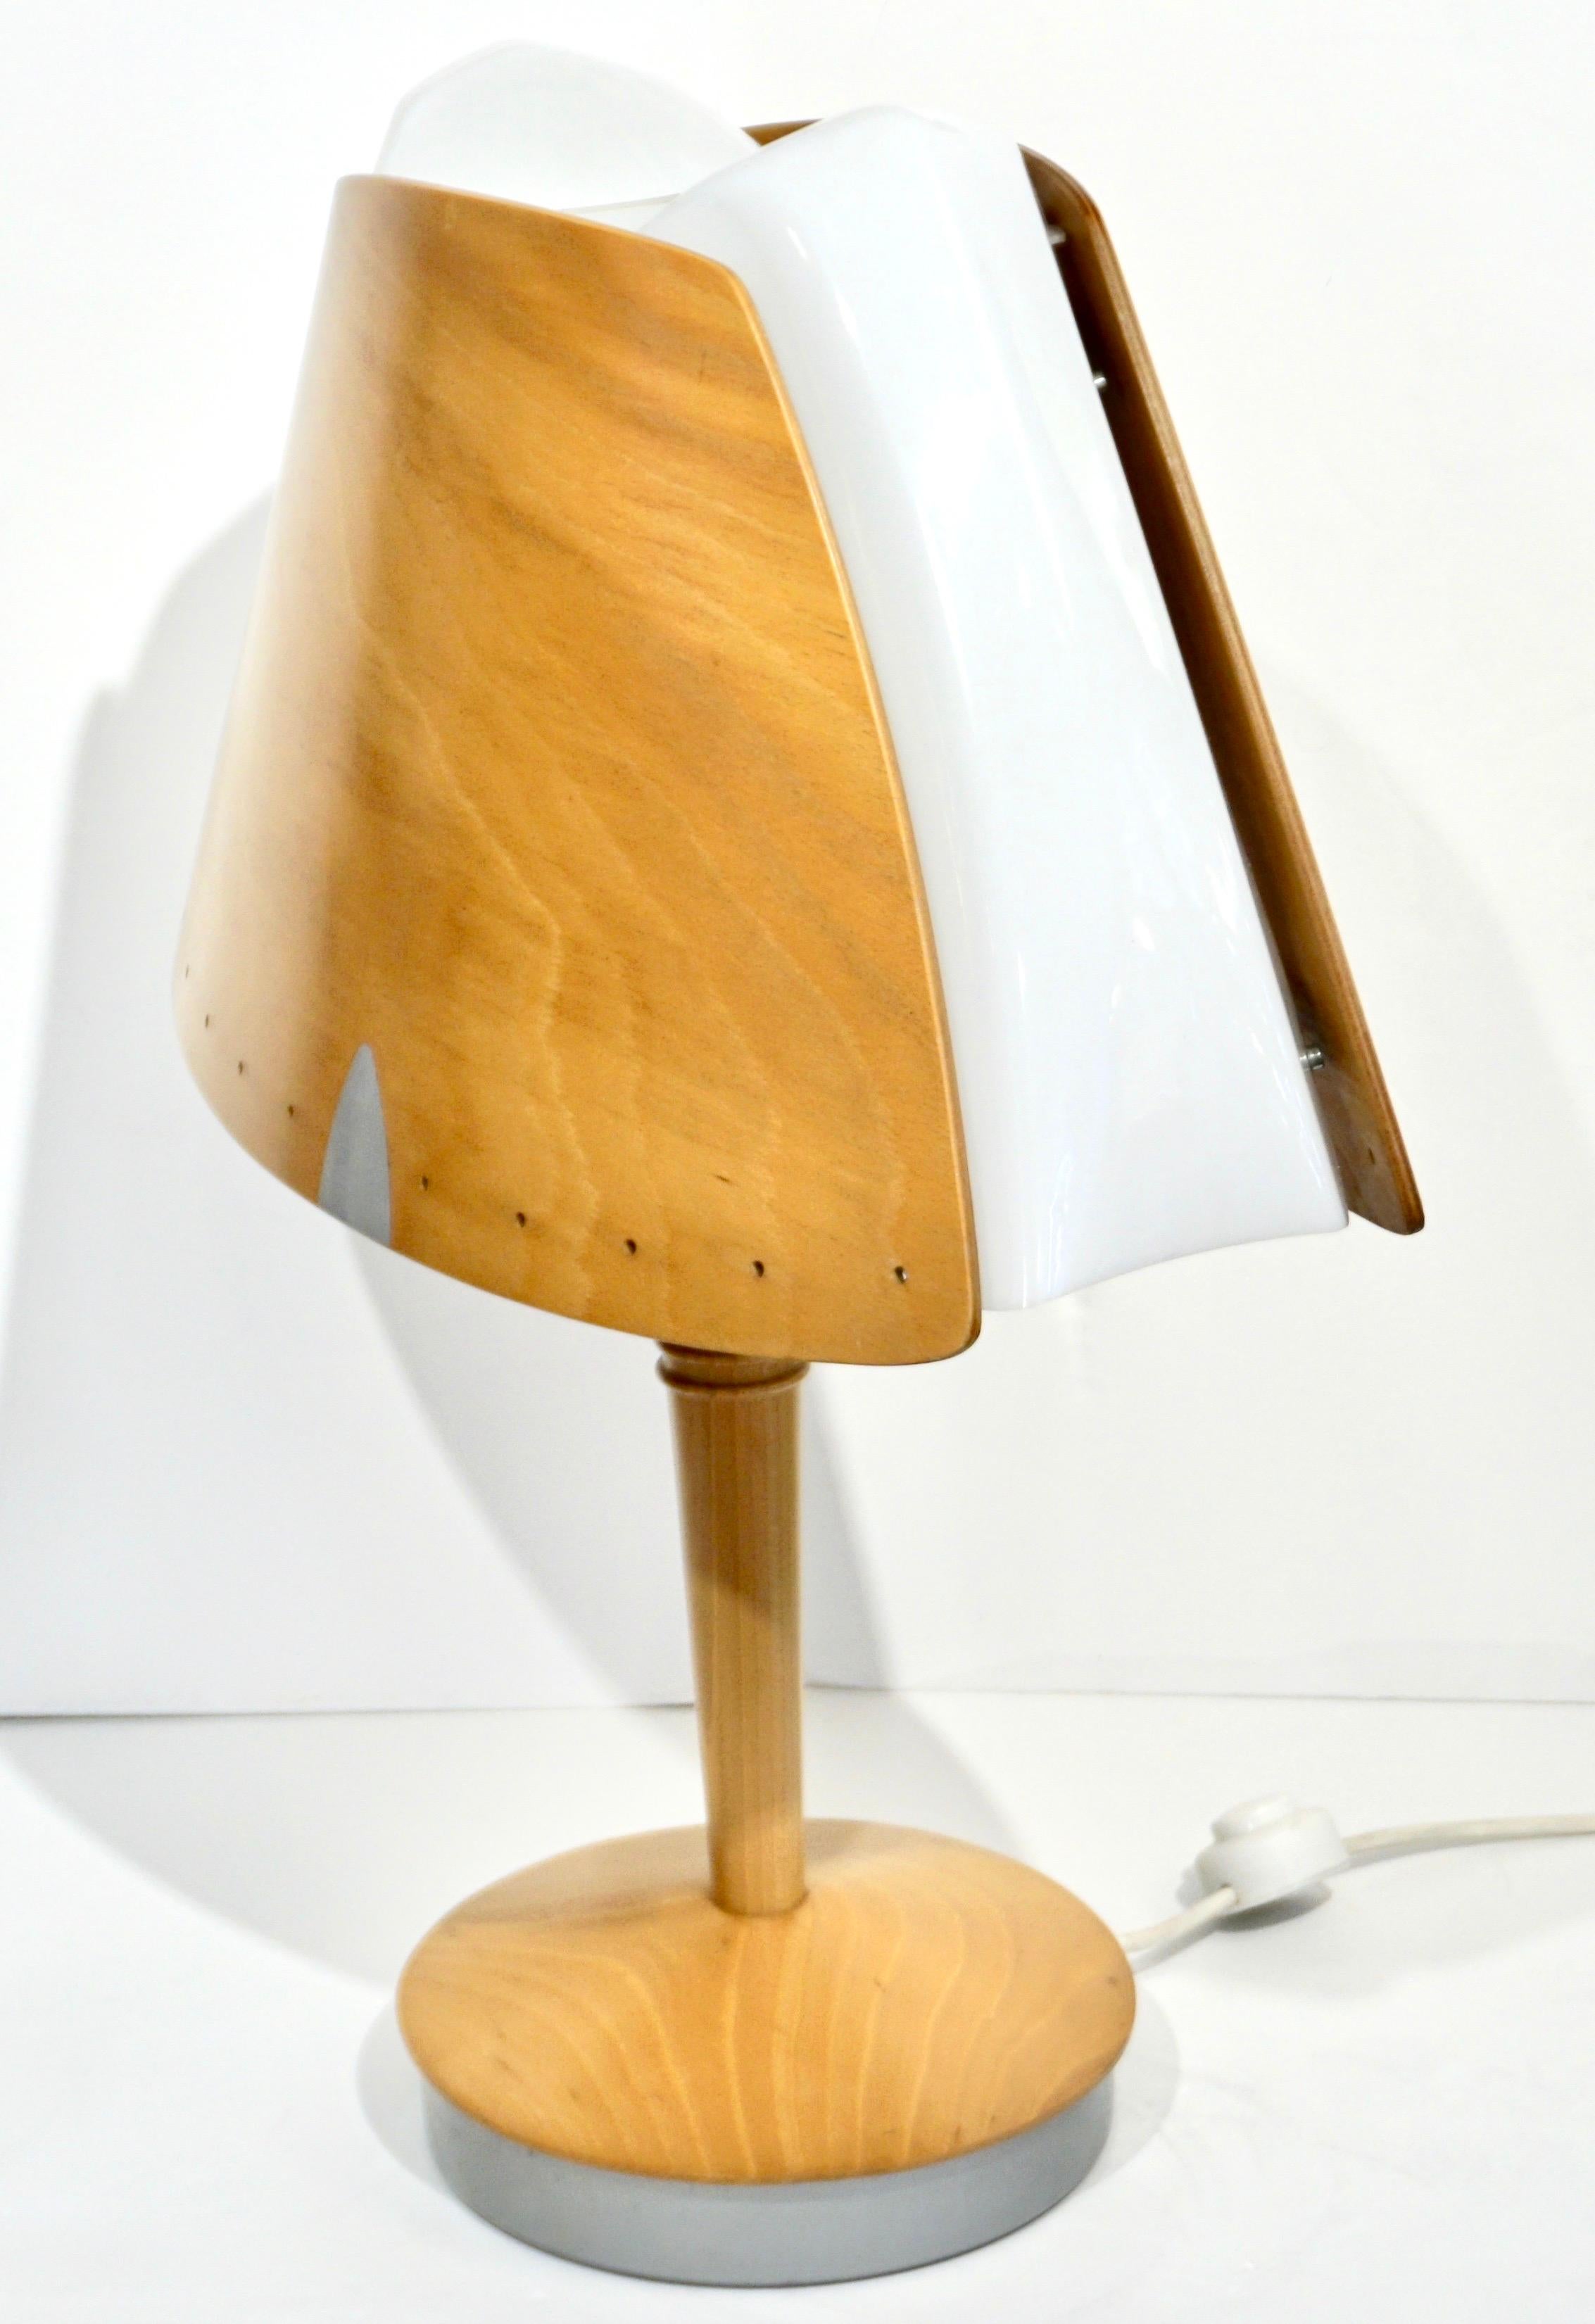 1970 French Pair of Birch Wood and Acrylic Table Lamp for Barcelona Hilton Hotel For Sale 11